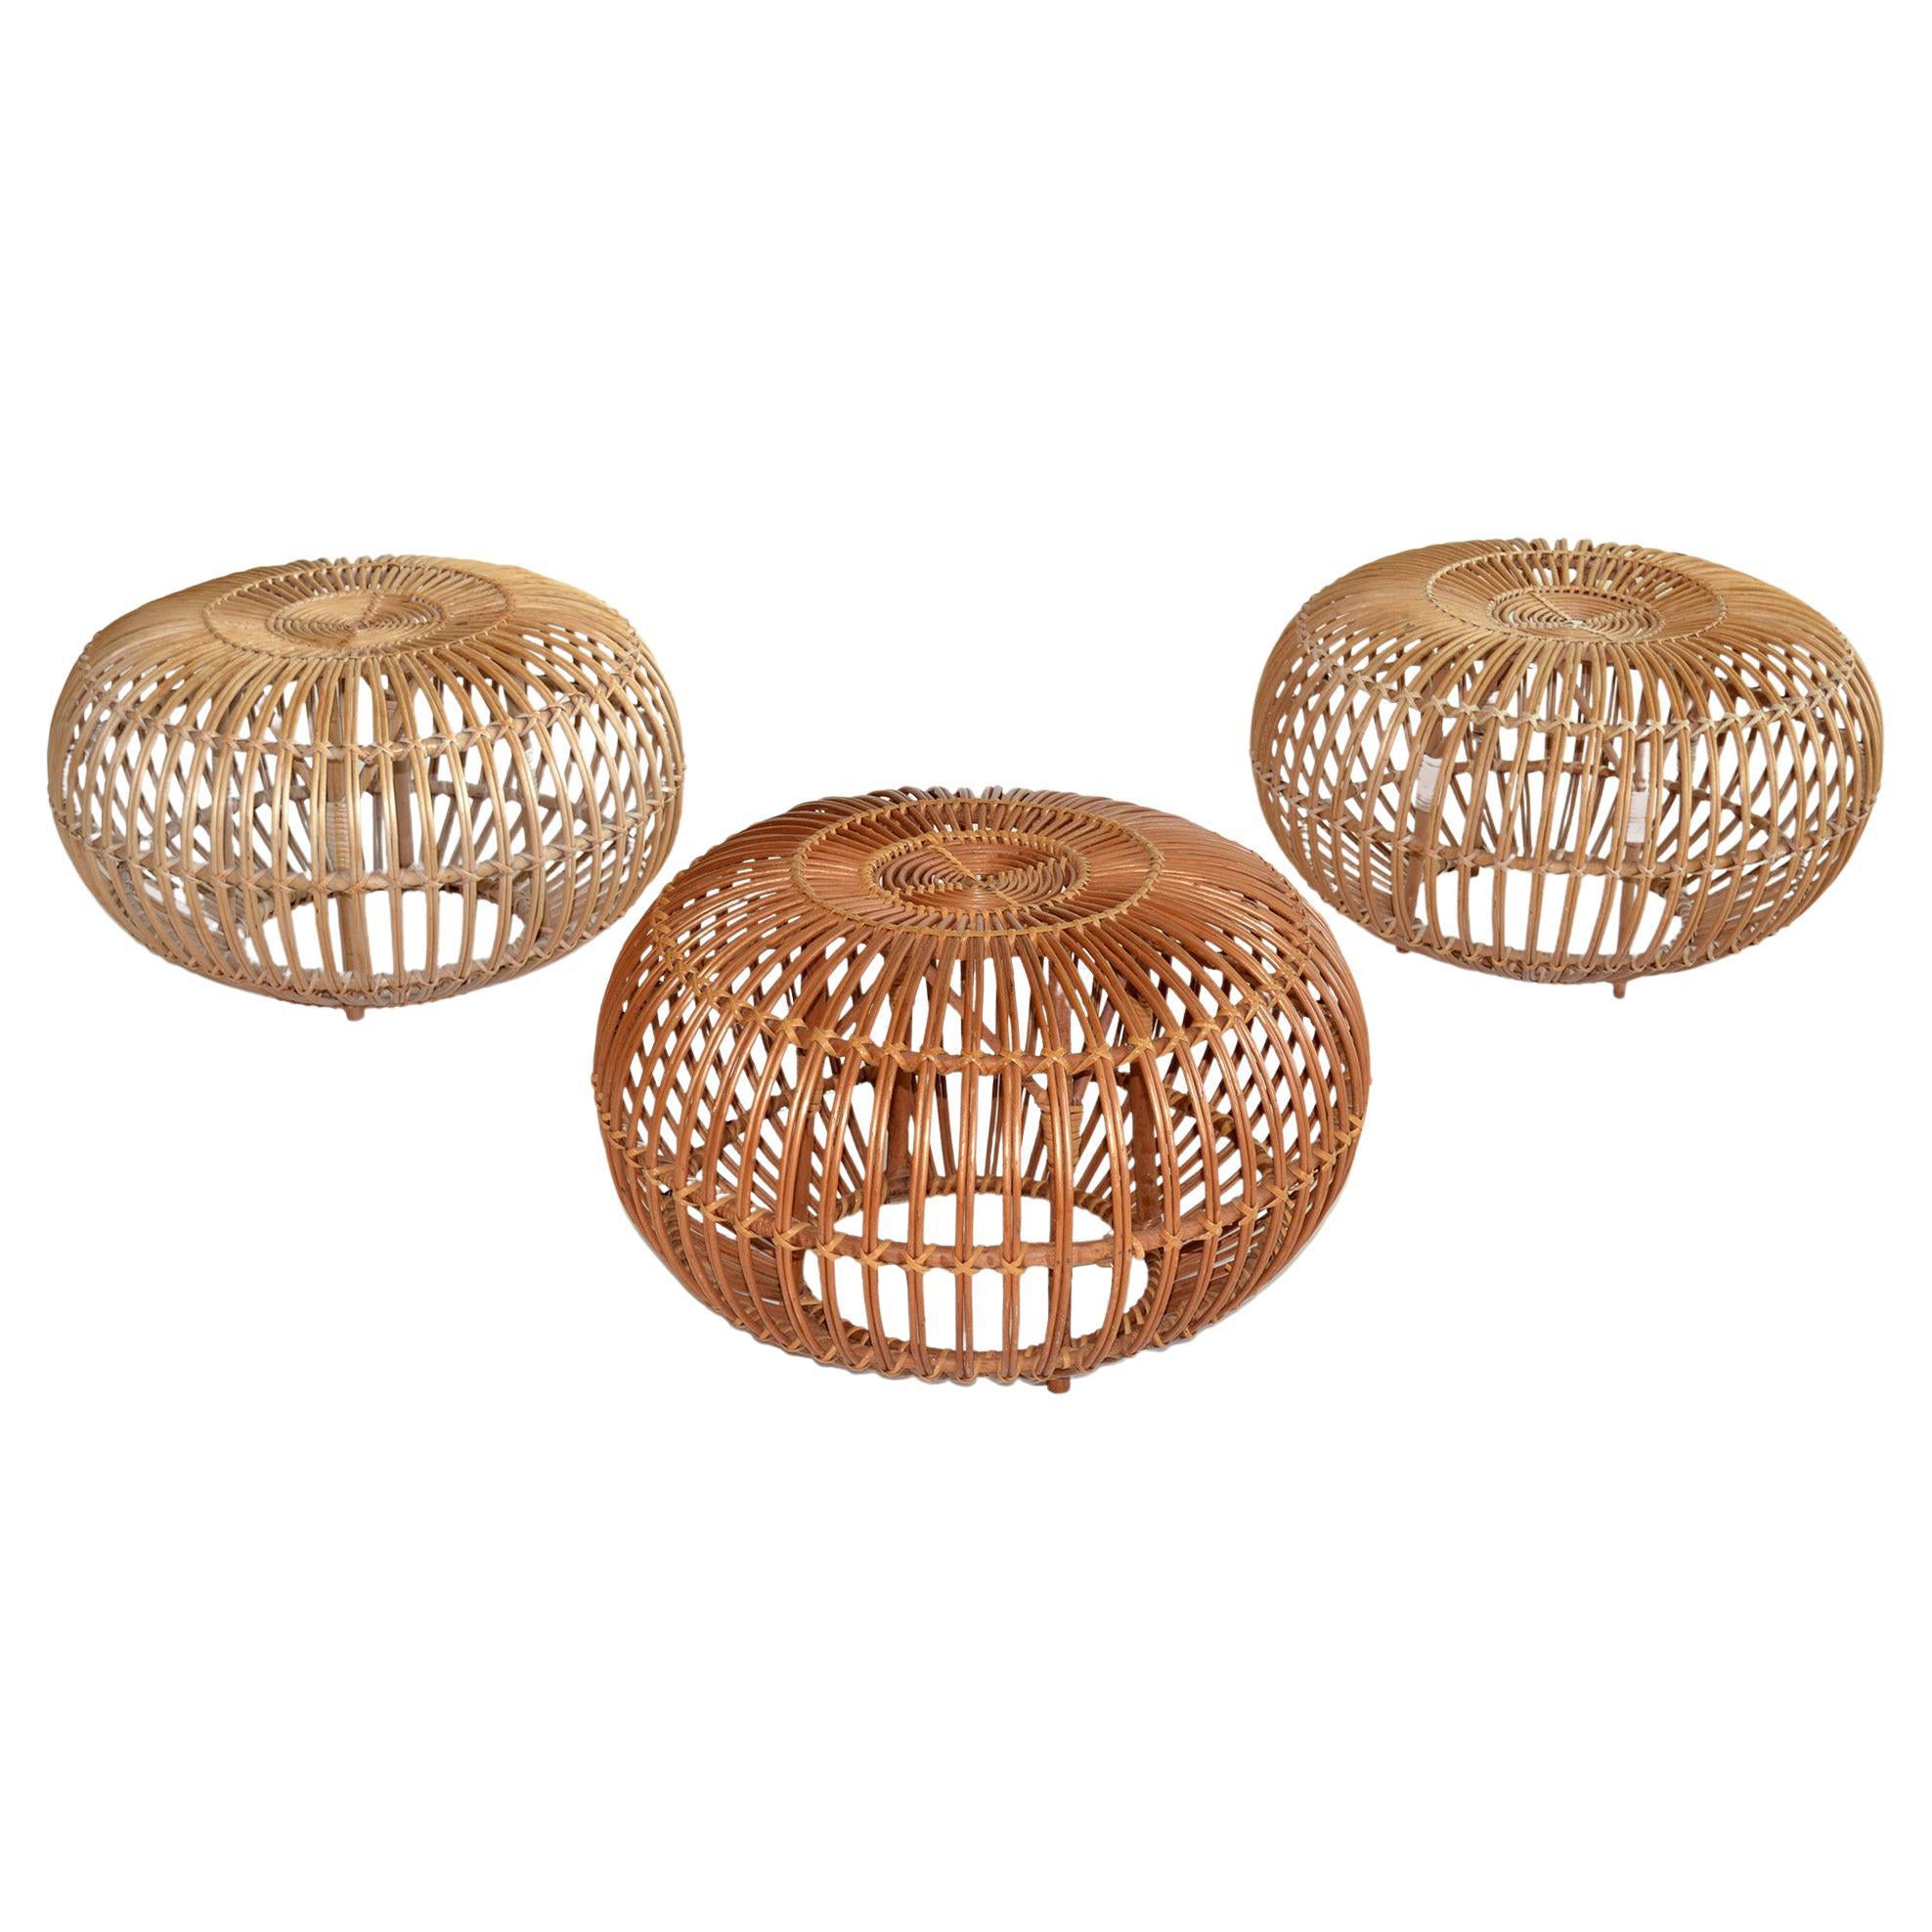 Set of Three Rattan Ottomans, Poufs or Stools by Franco Albini Italy, 1960s